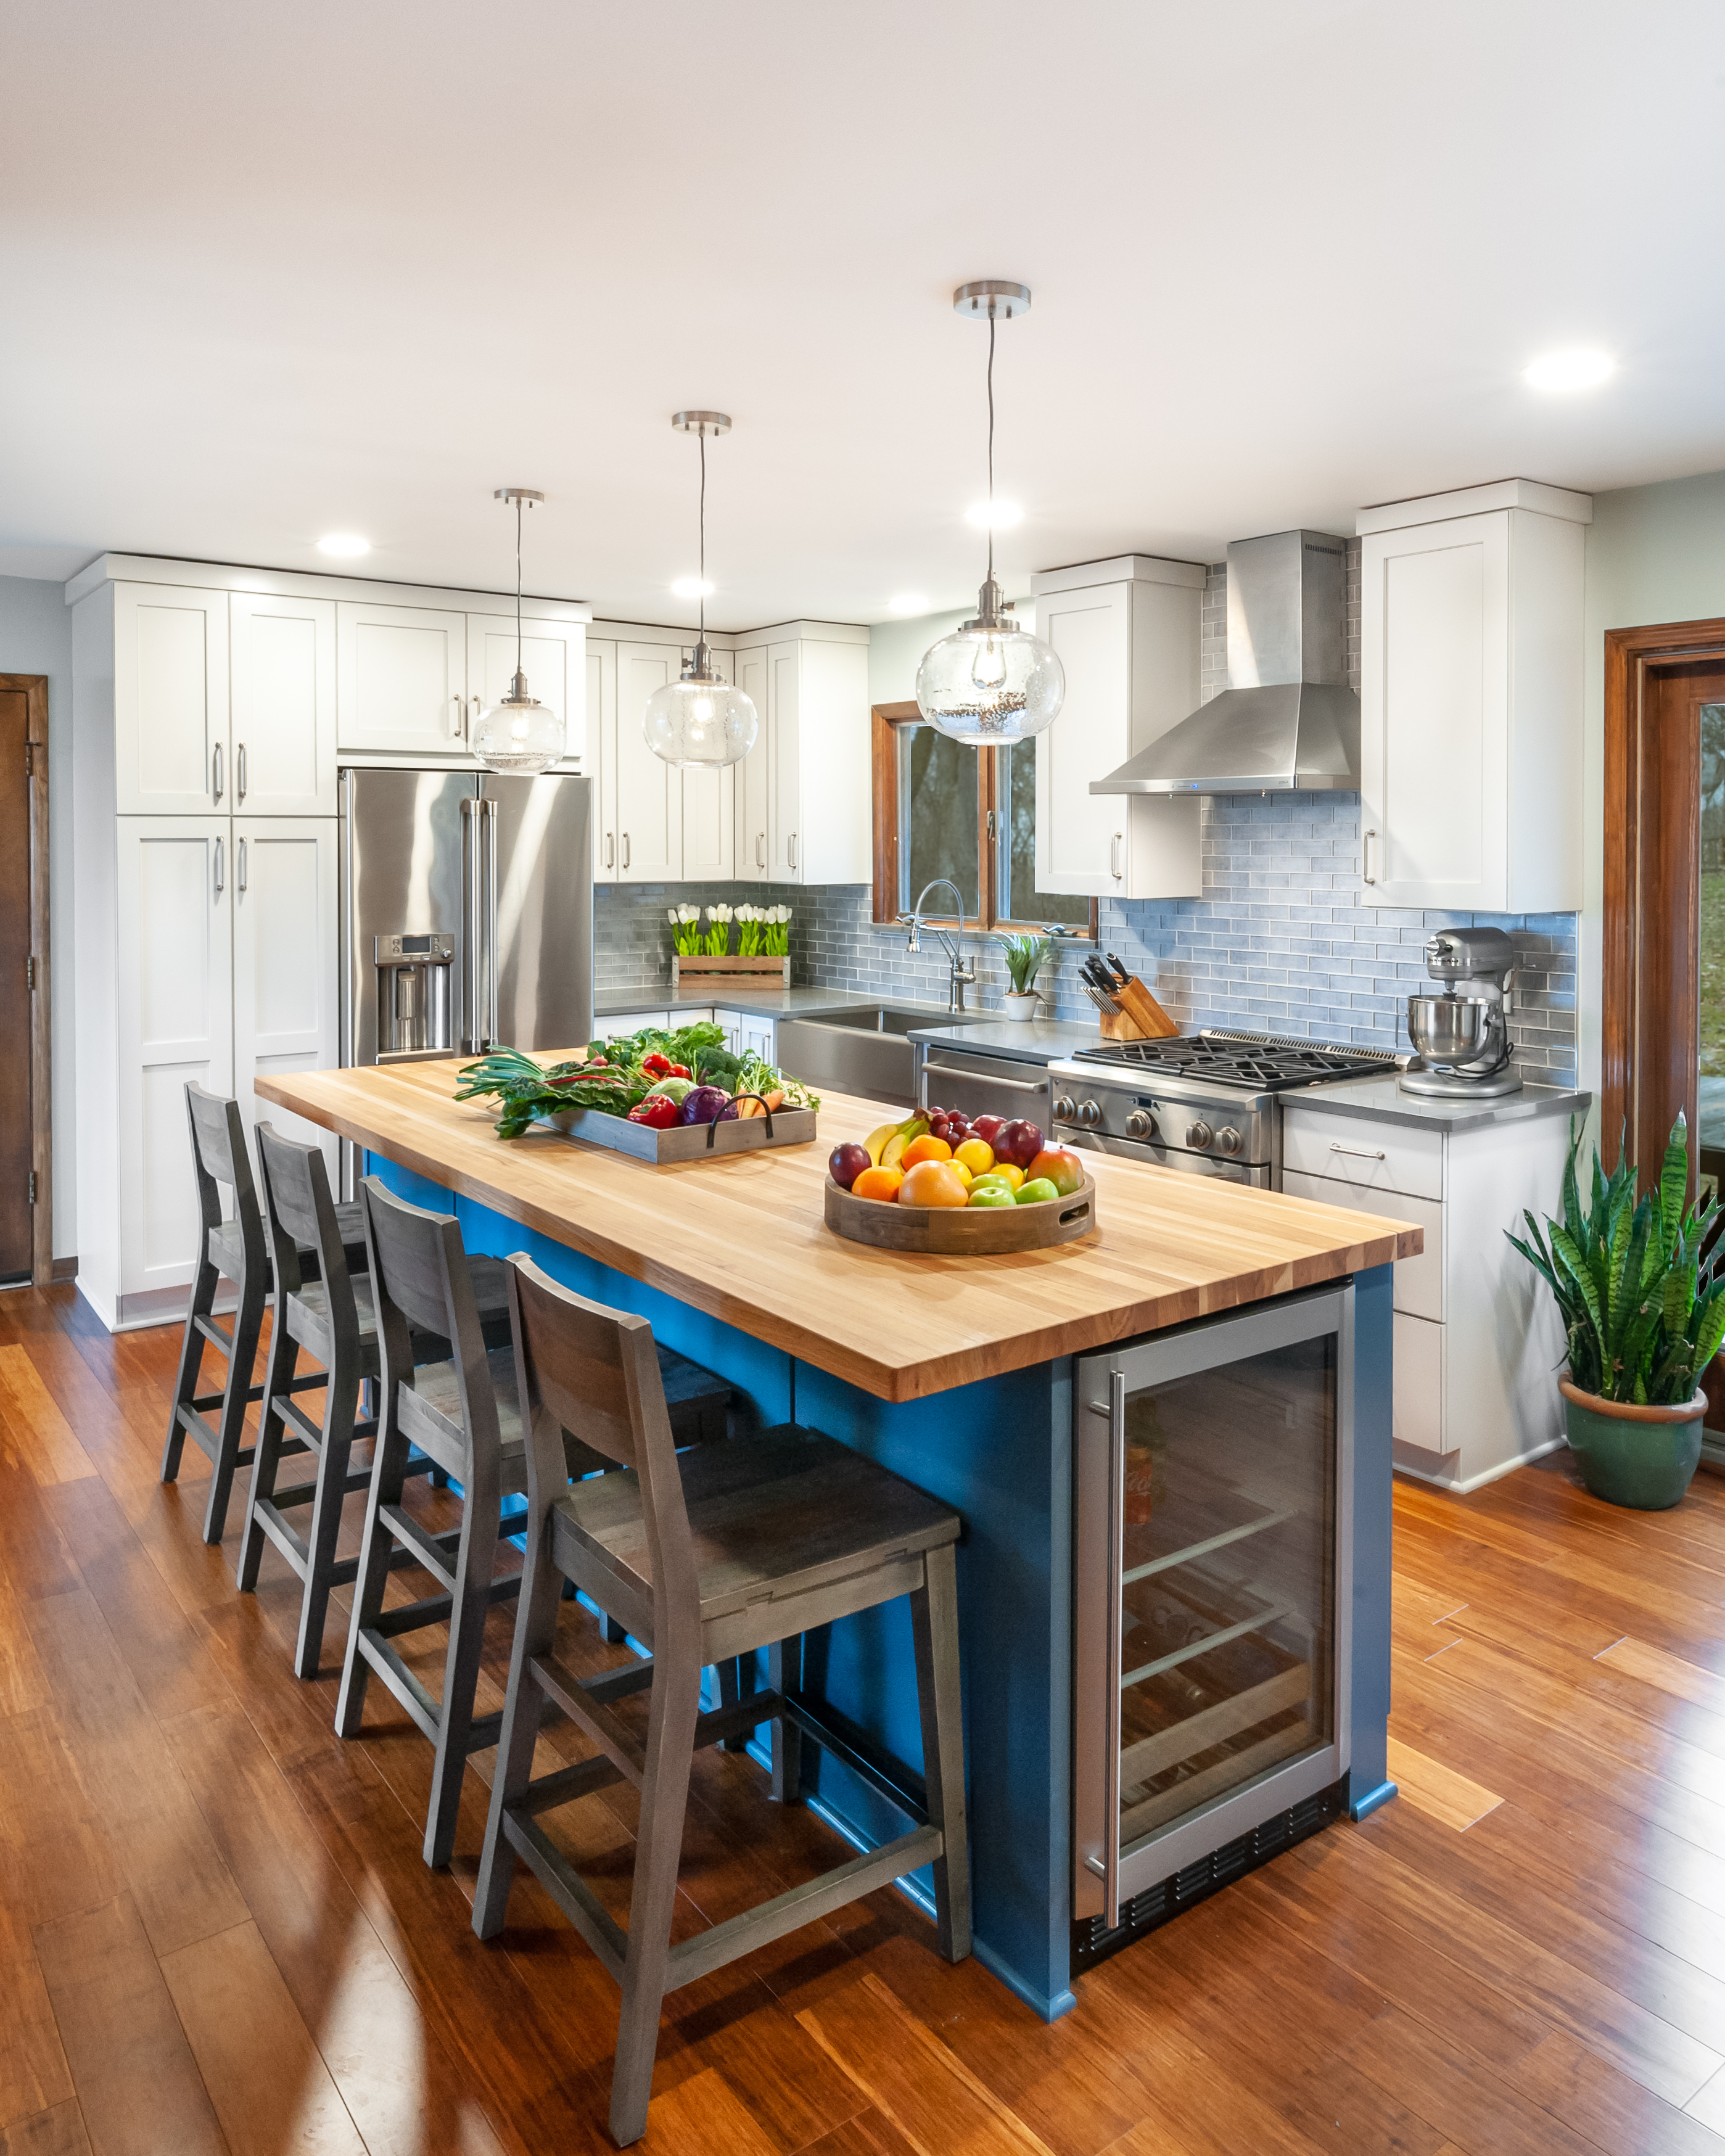 Kitchen Remodeling Typically Cost, How Much Does It Cost To Remodel A Kitchen In California